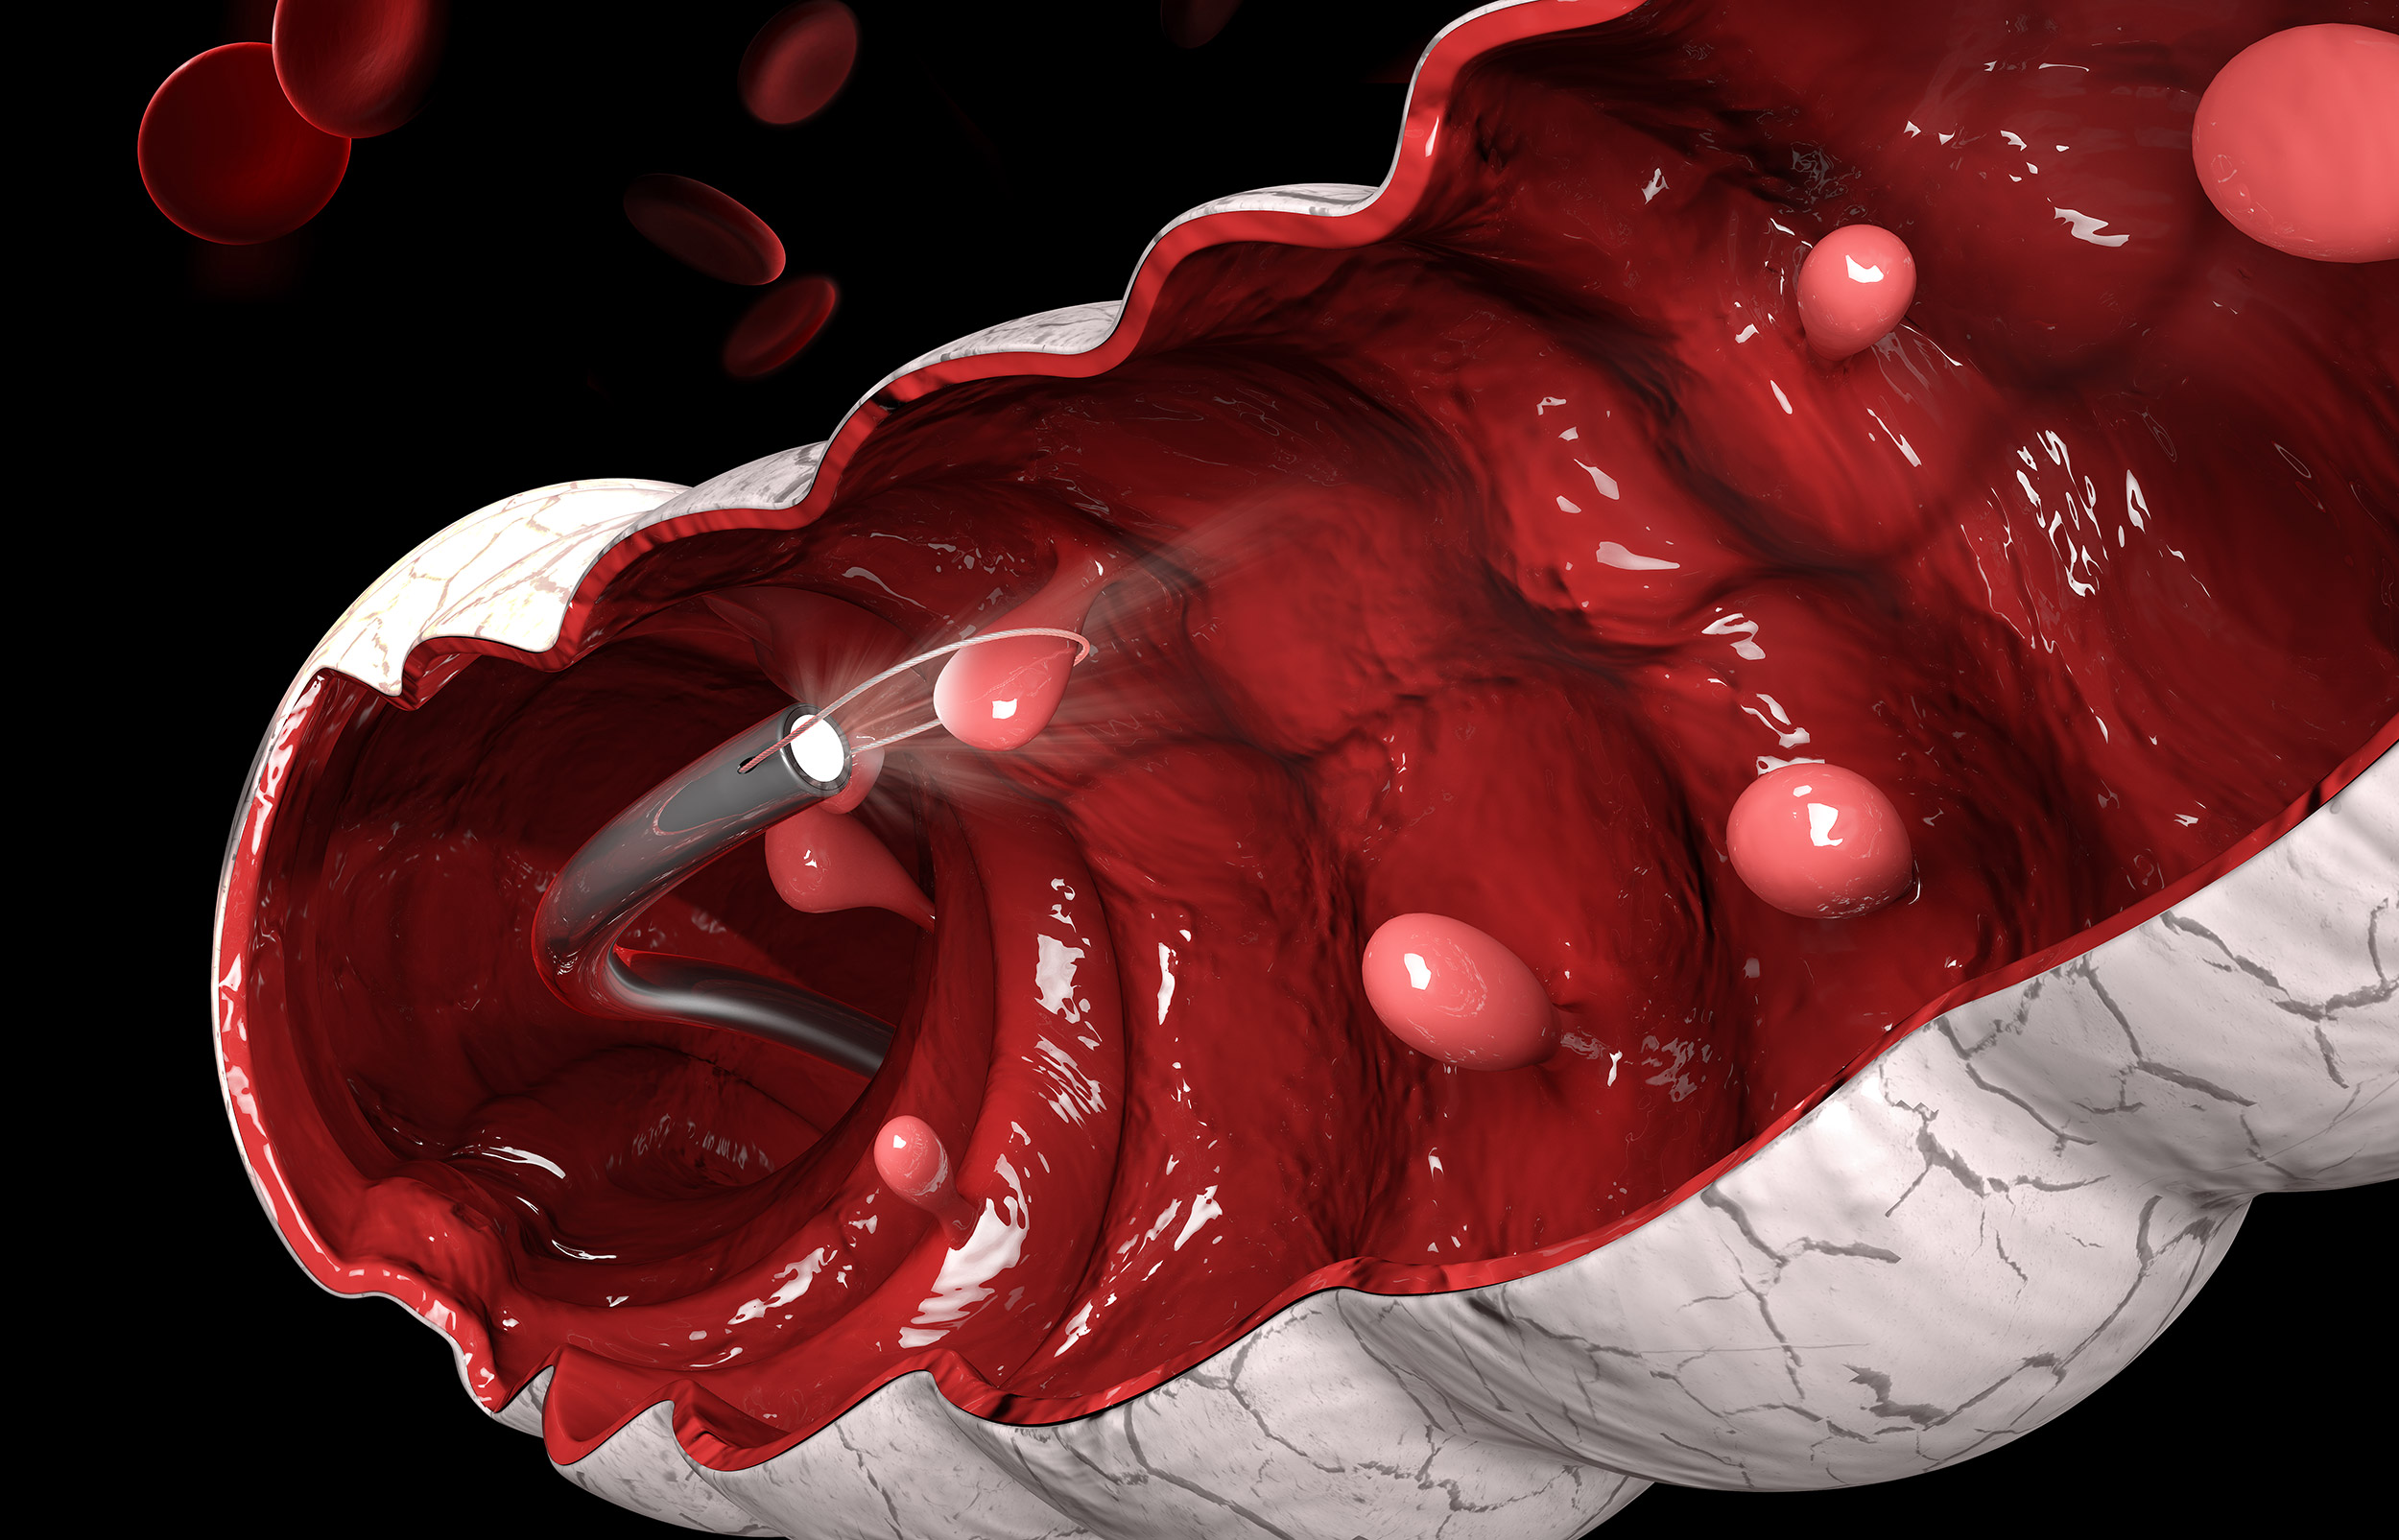 3d illustration of Removal of a colonic polyp with a electrical wire loop during a colonoscopy